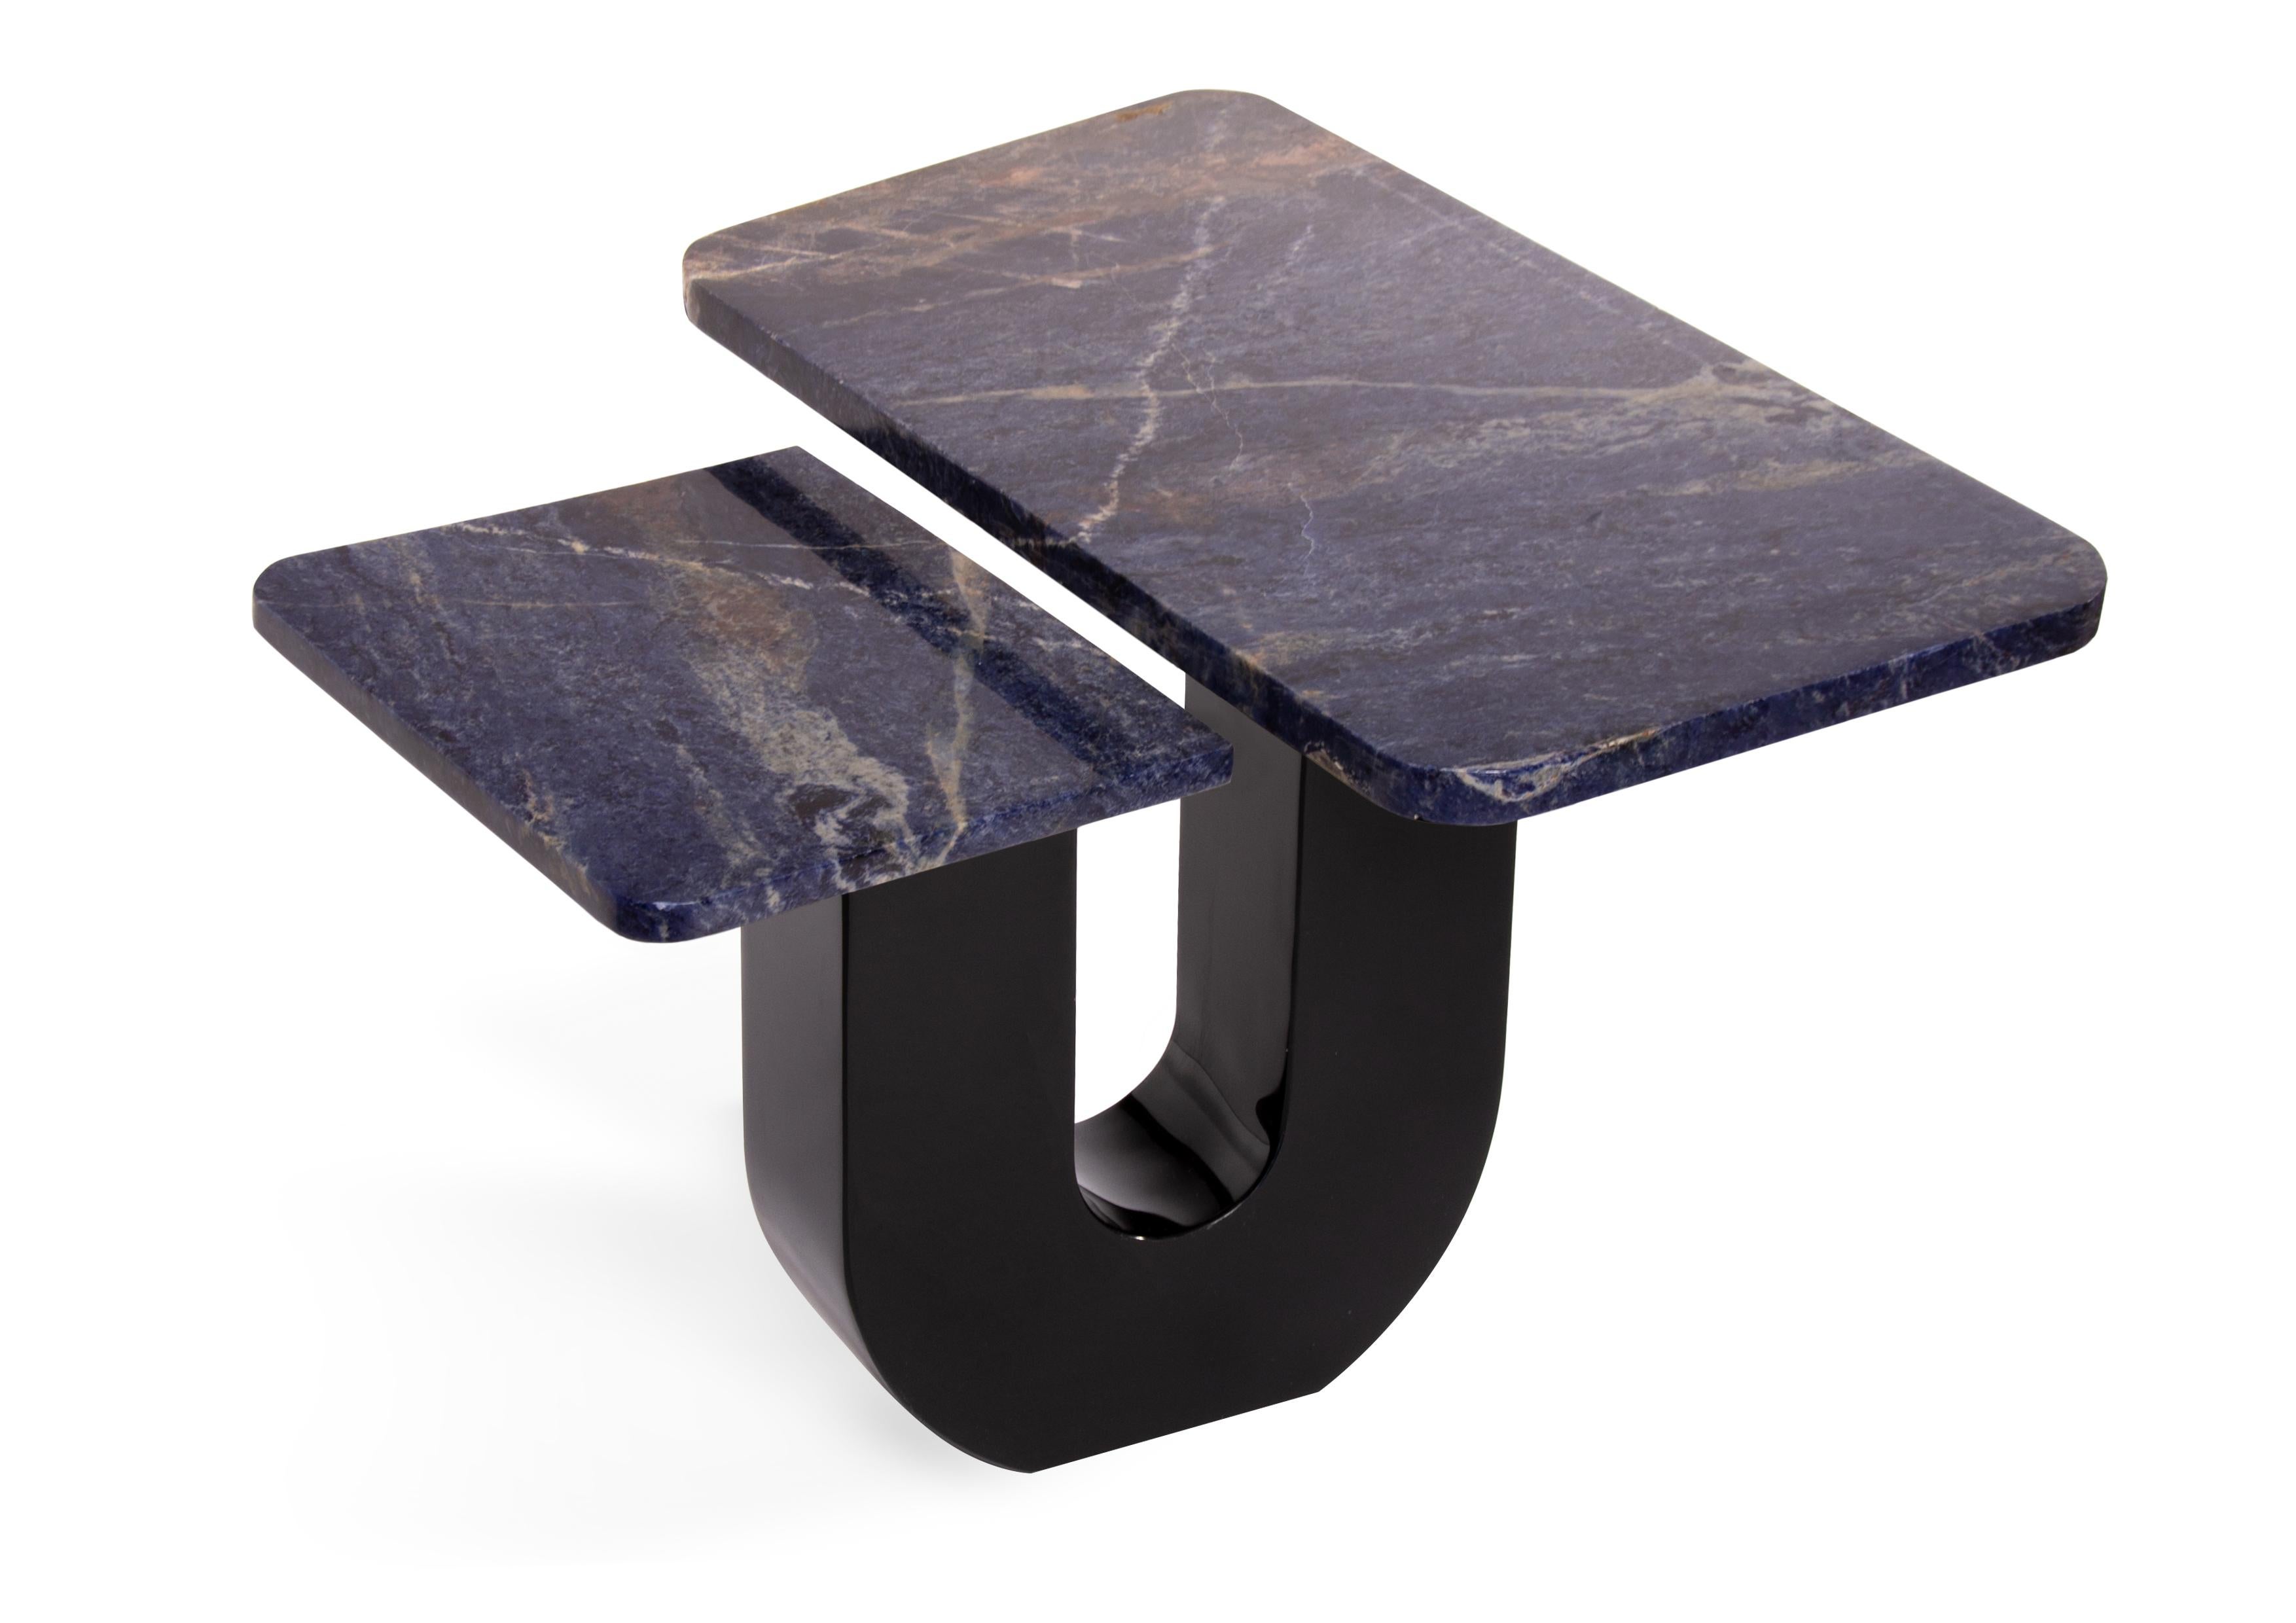 Organic Modern Configurable Geometry IV Side Table by Sten Studio, REP by Tuleste Factory